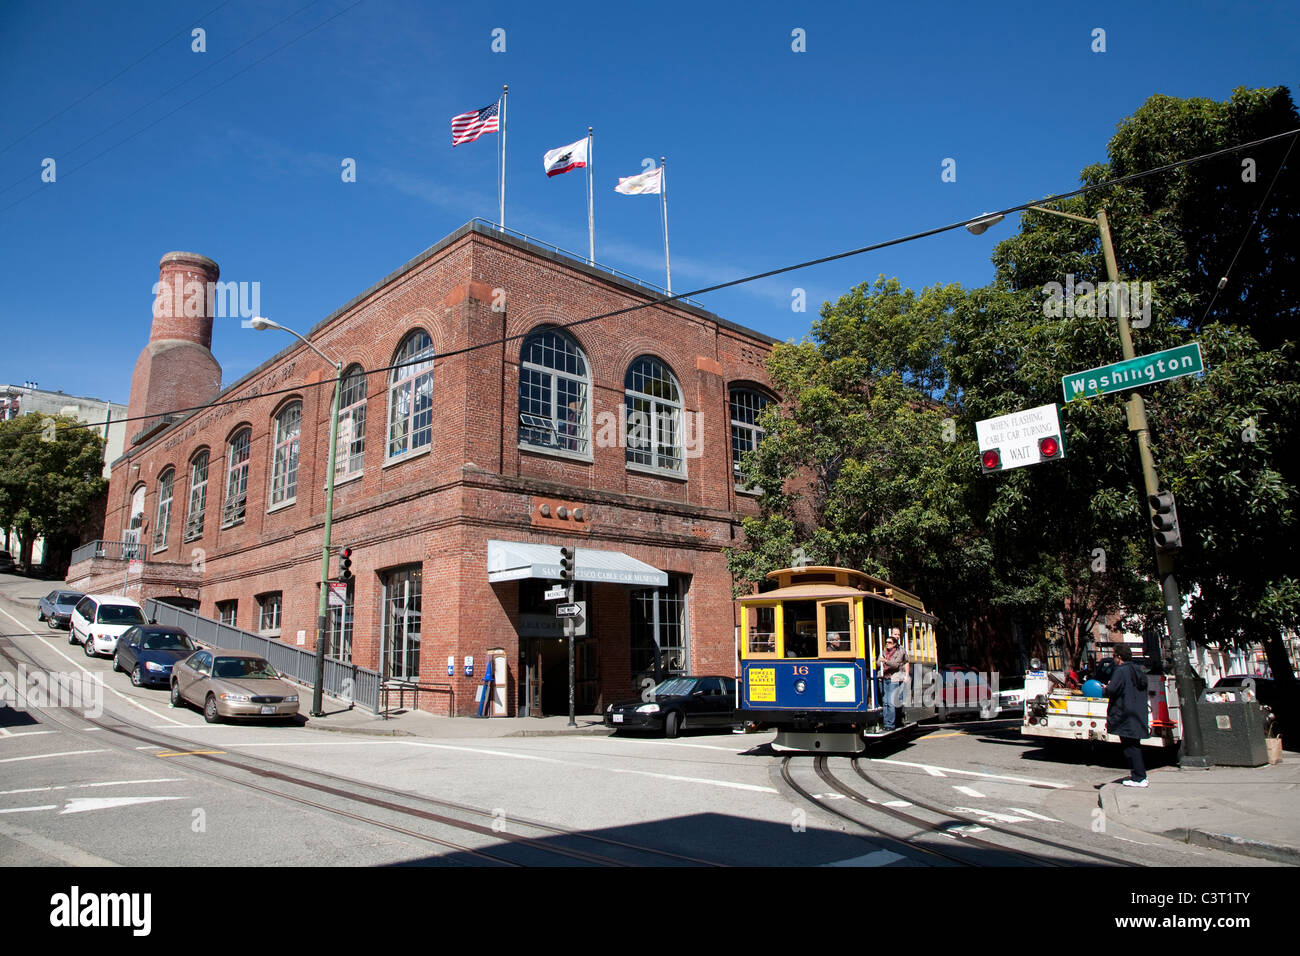 Cable car passing the Cable Car Museum with powerhouse and car barn, Washington and Mason Streets, Nob Hill, San Francisco Stock Photo